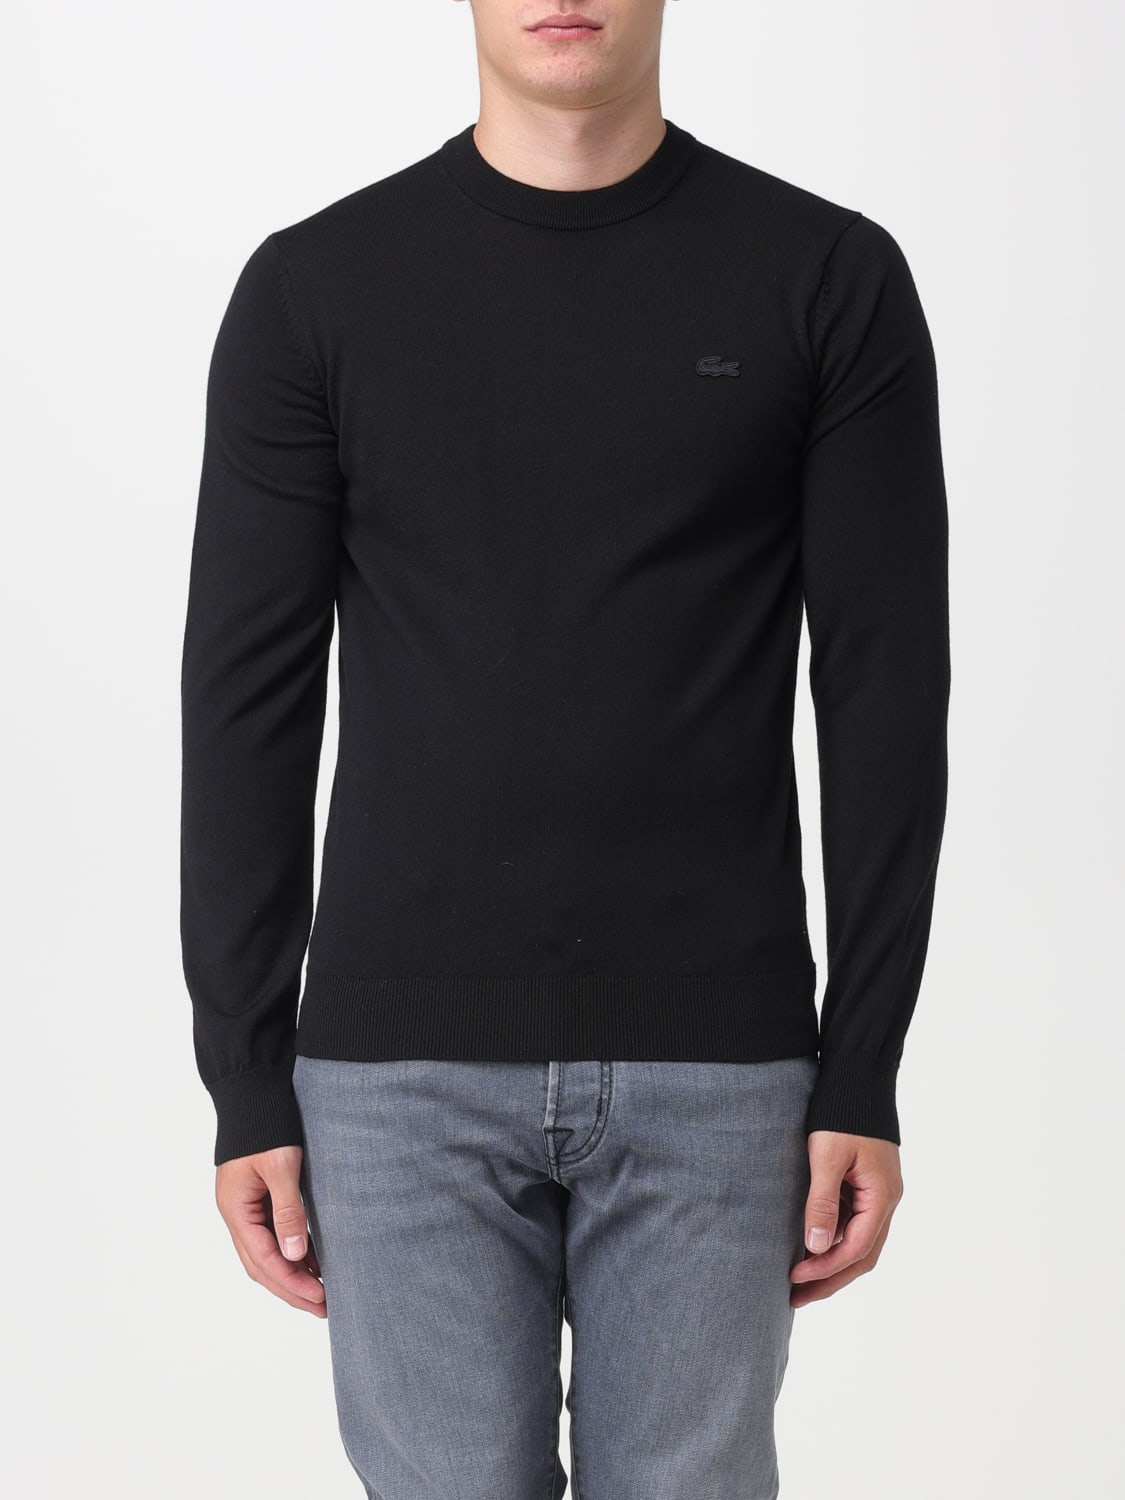 LACOSTE: man - Black | Lacoste sweater AH1969 online at GIGLIO.COM